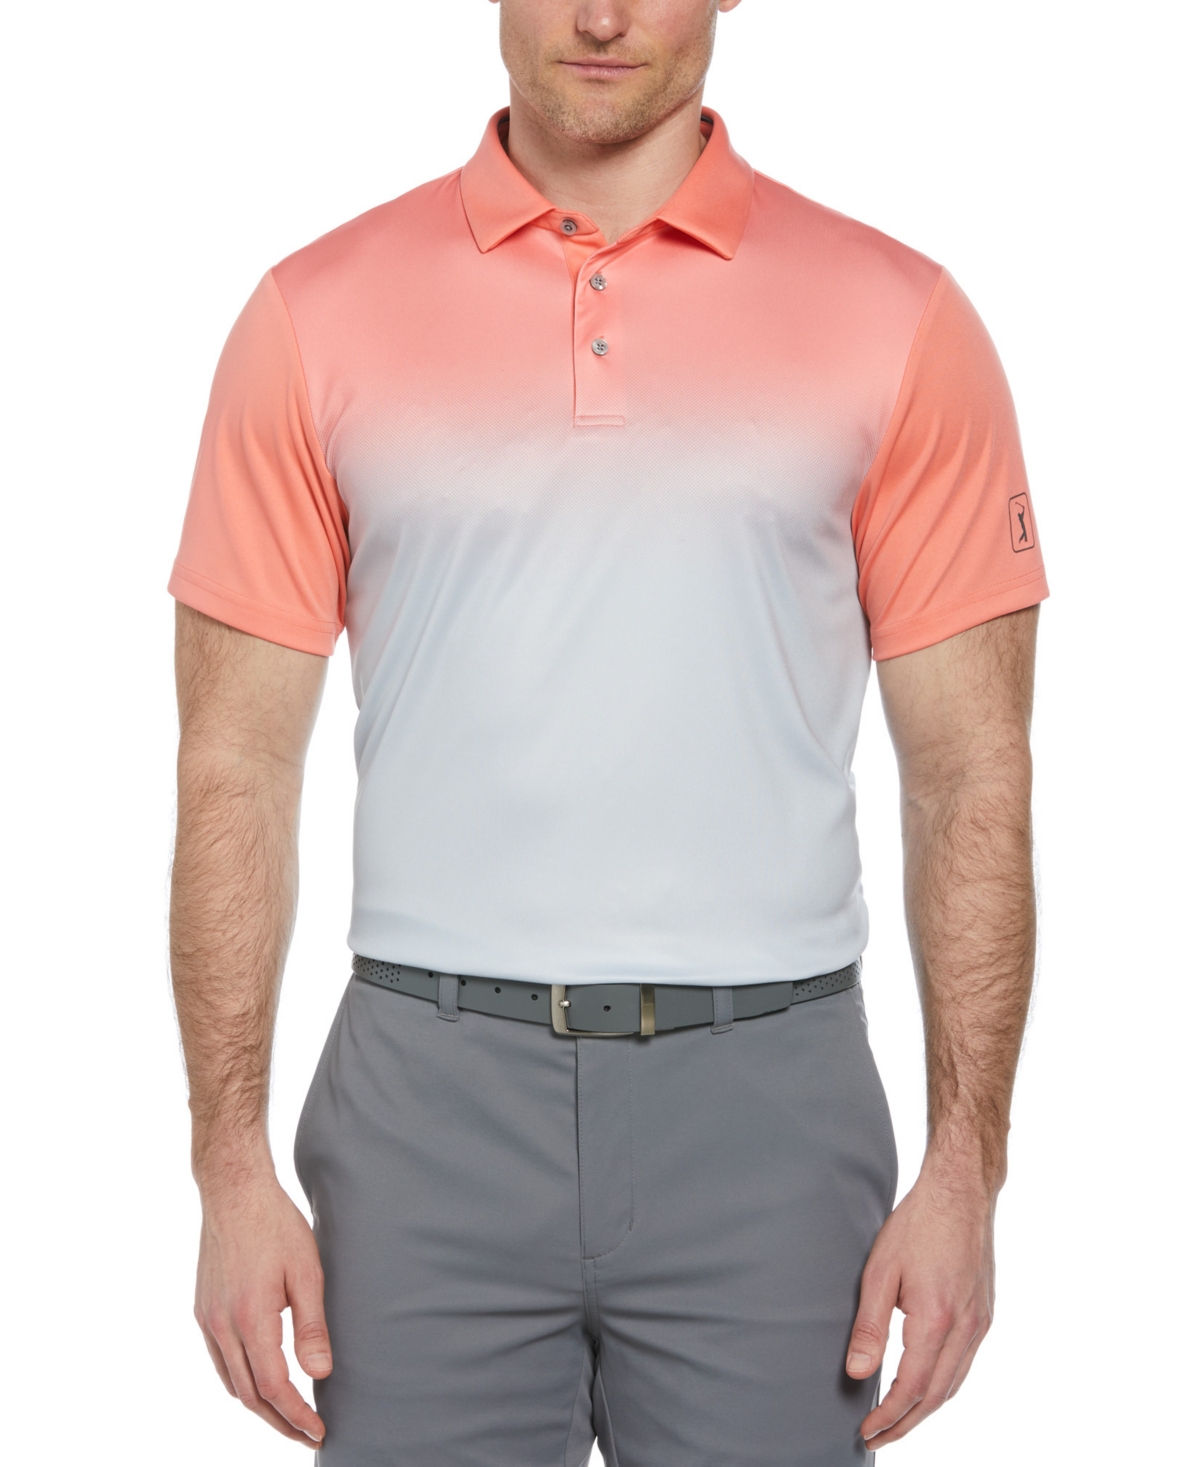 Men's Ombre Short Sleeve Performance Polo Shirt - Shell Pink